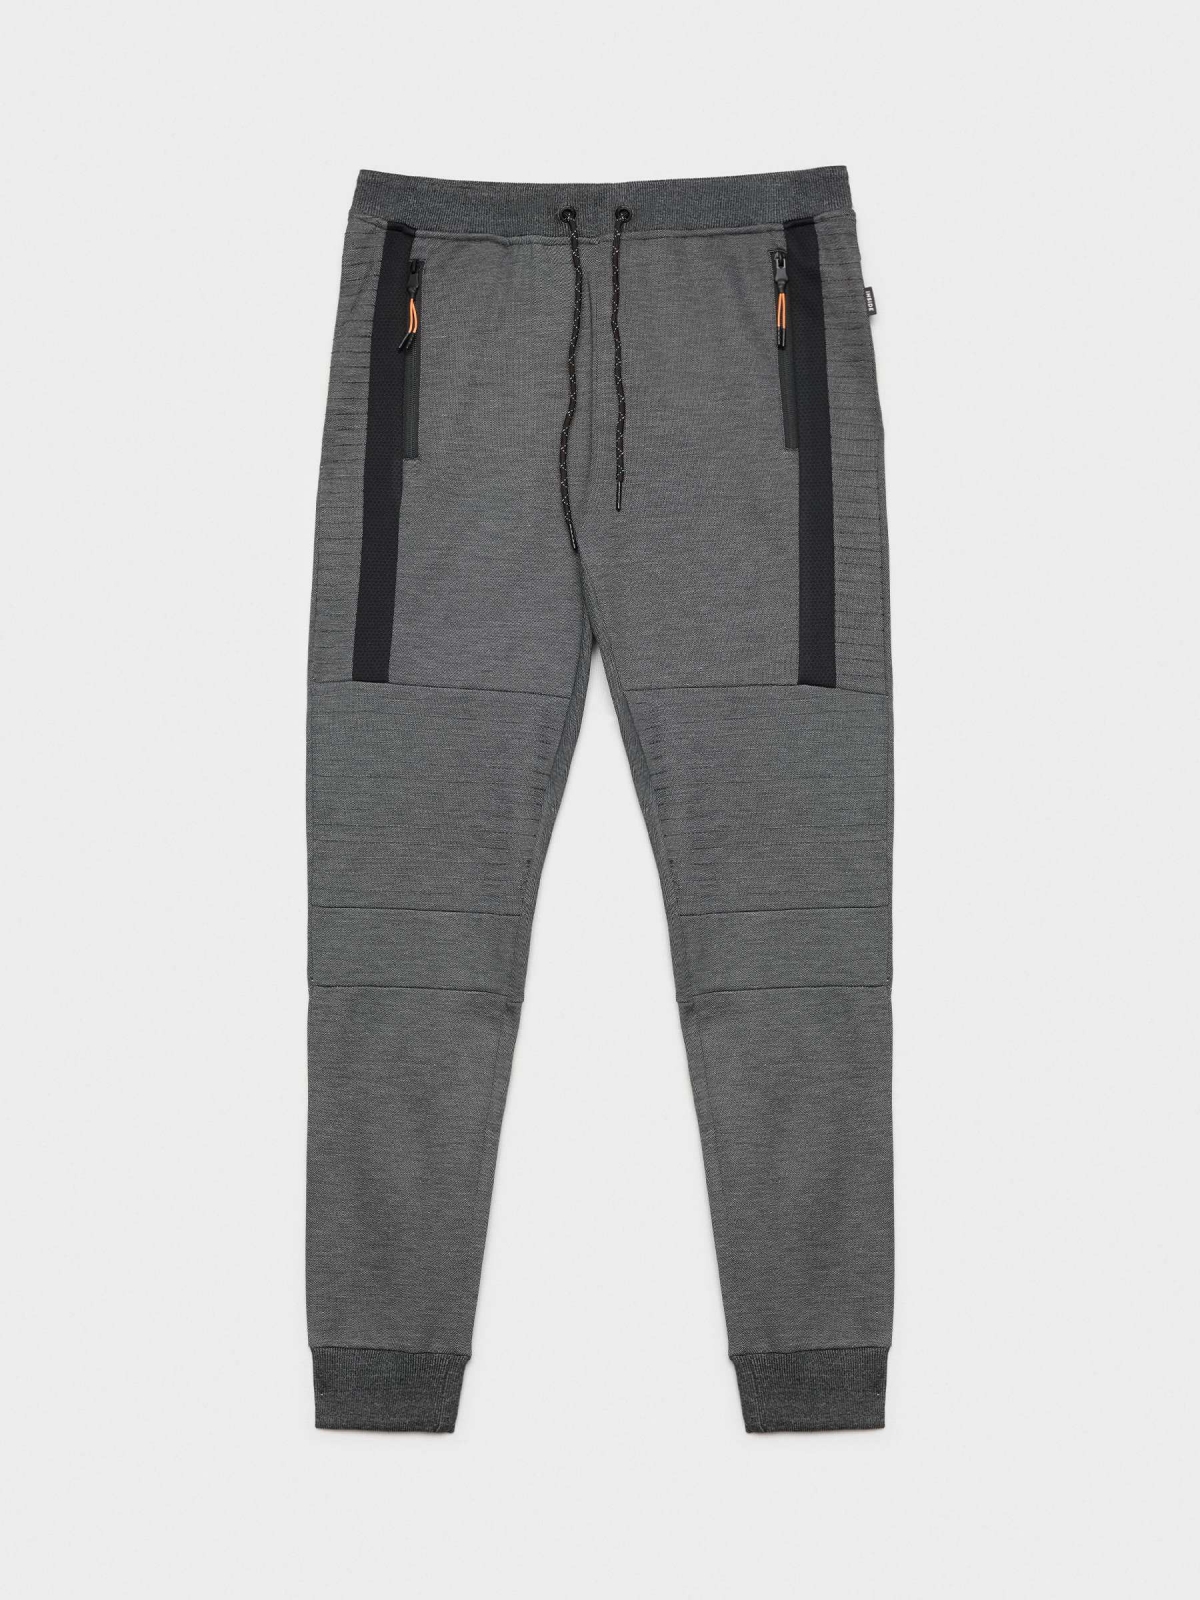  Jogger pants with zippers black